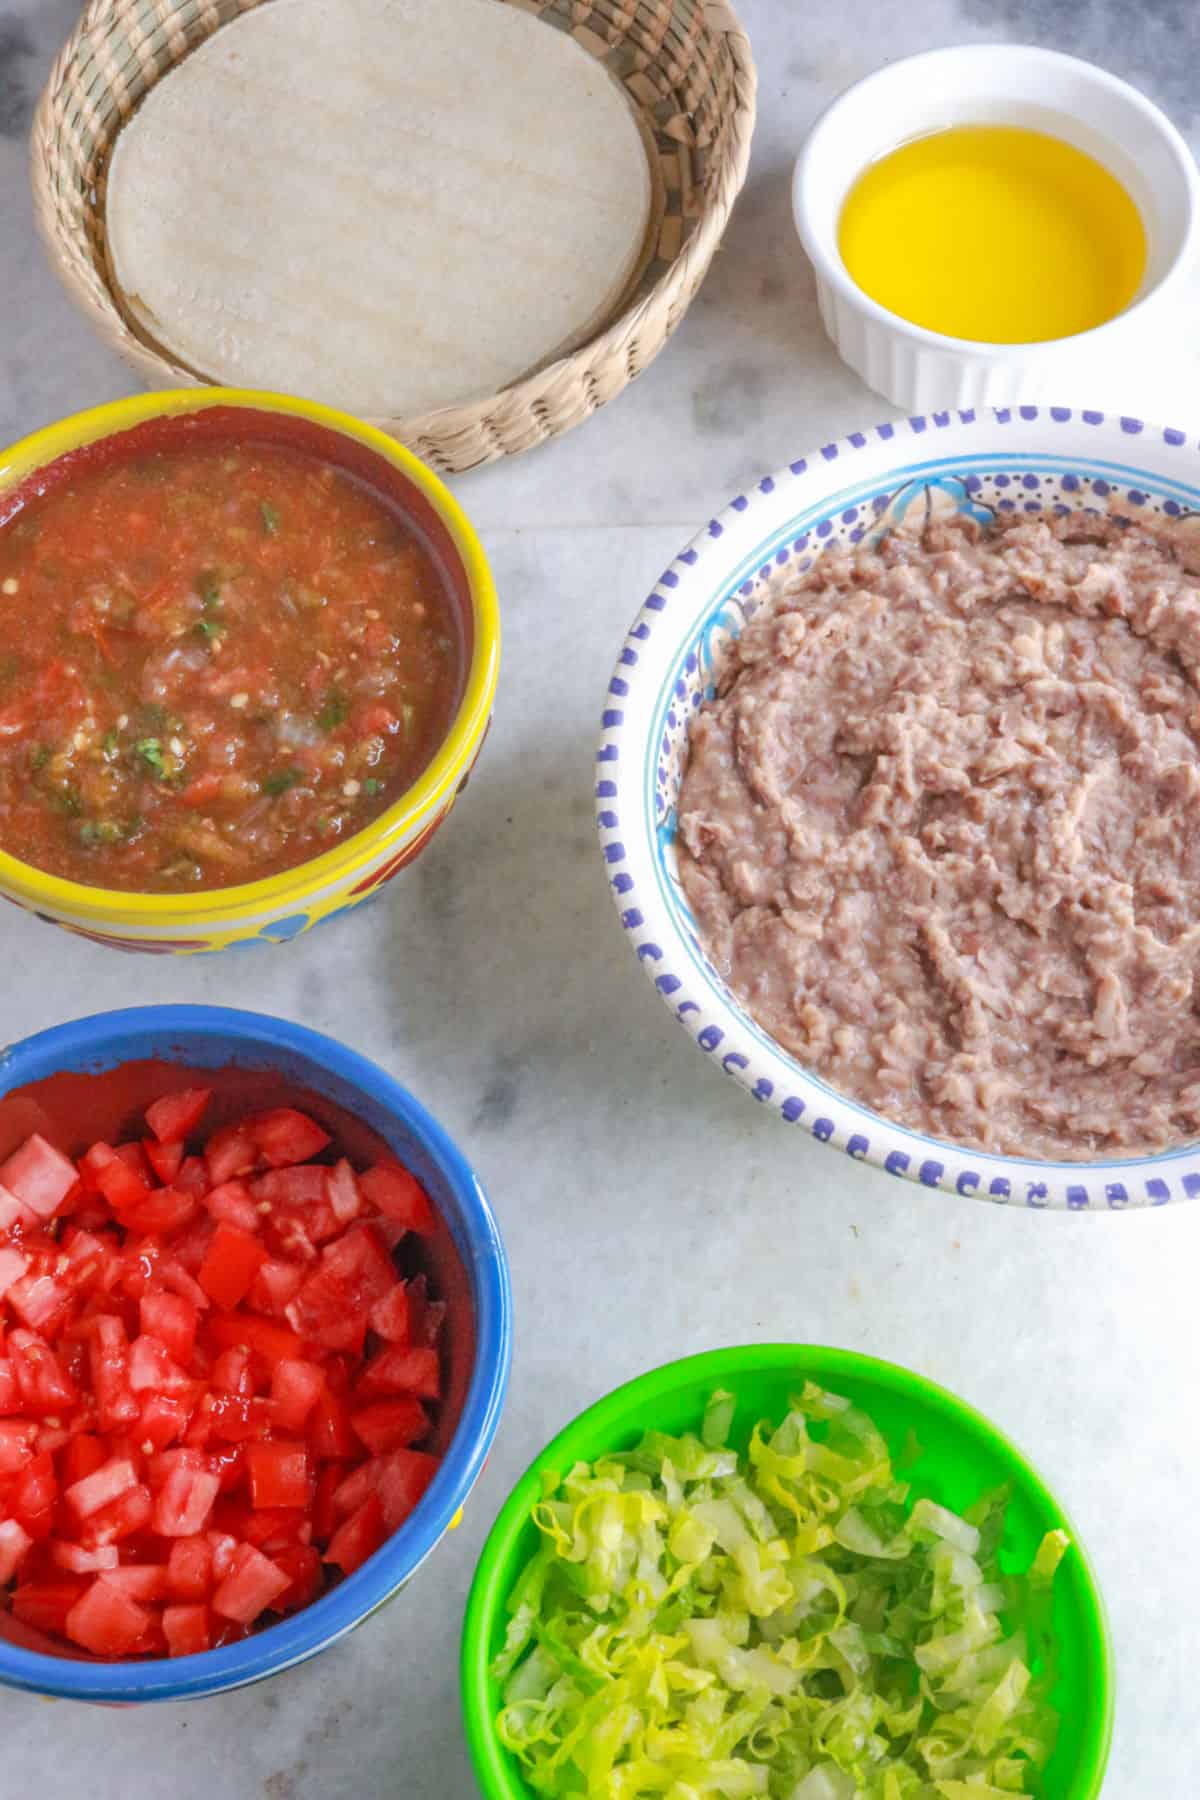 A basket with corn tortillas, a bowl with oil, a bowl with jalapeño salsa, a bowl with refried beans, another with diced tomatoes and another with shredded lettuce